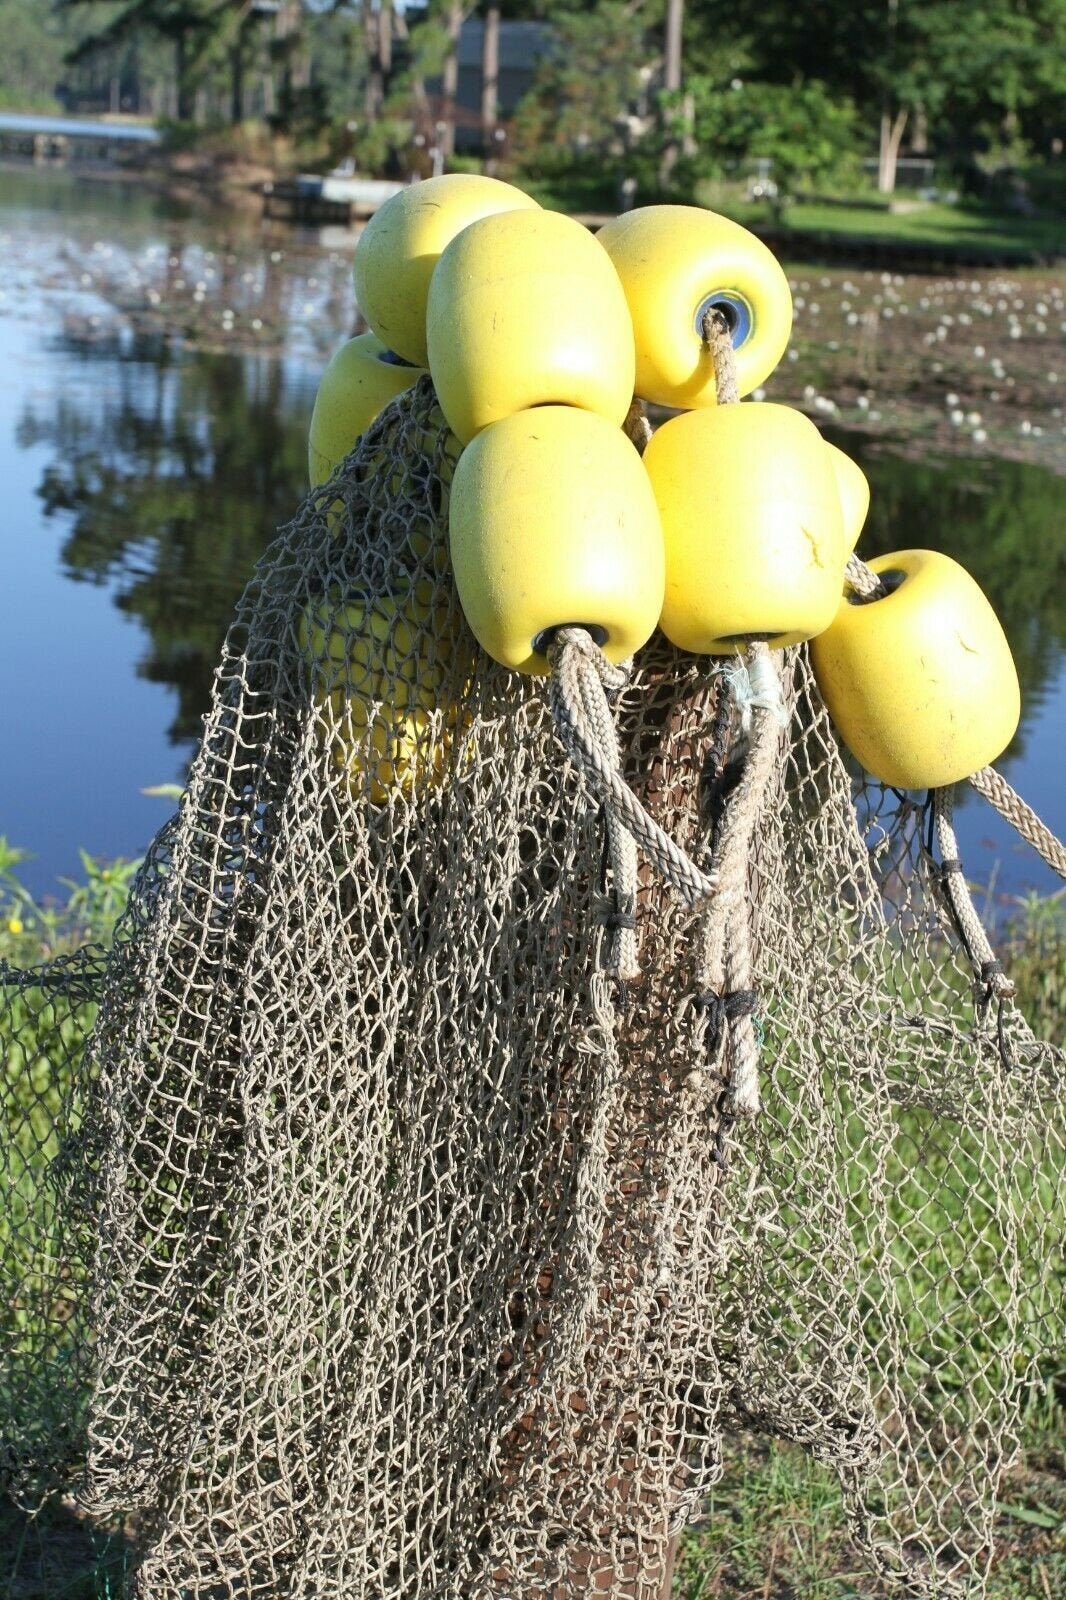 Fishing nets and floats on a spool of a small commercial fishing